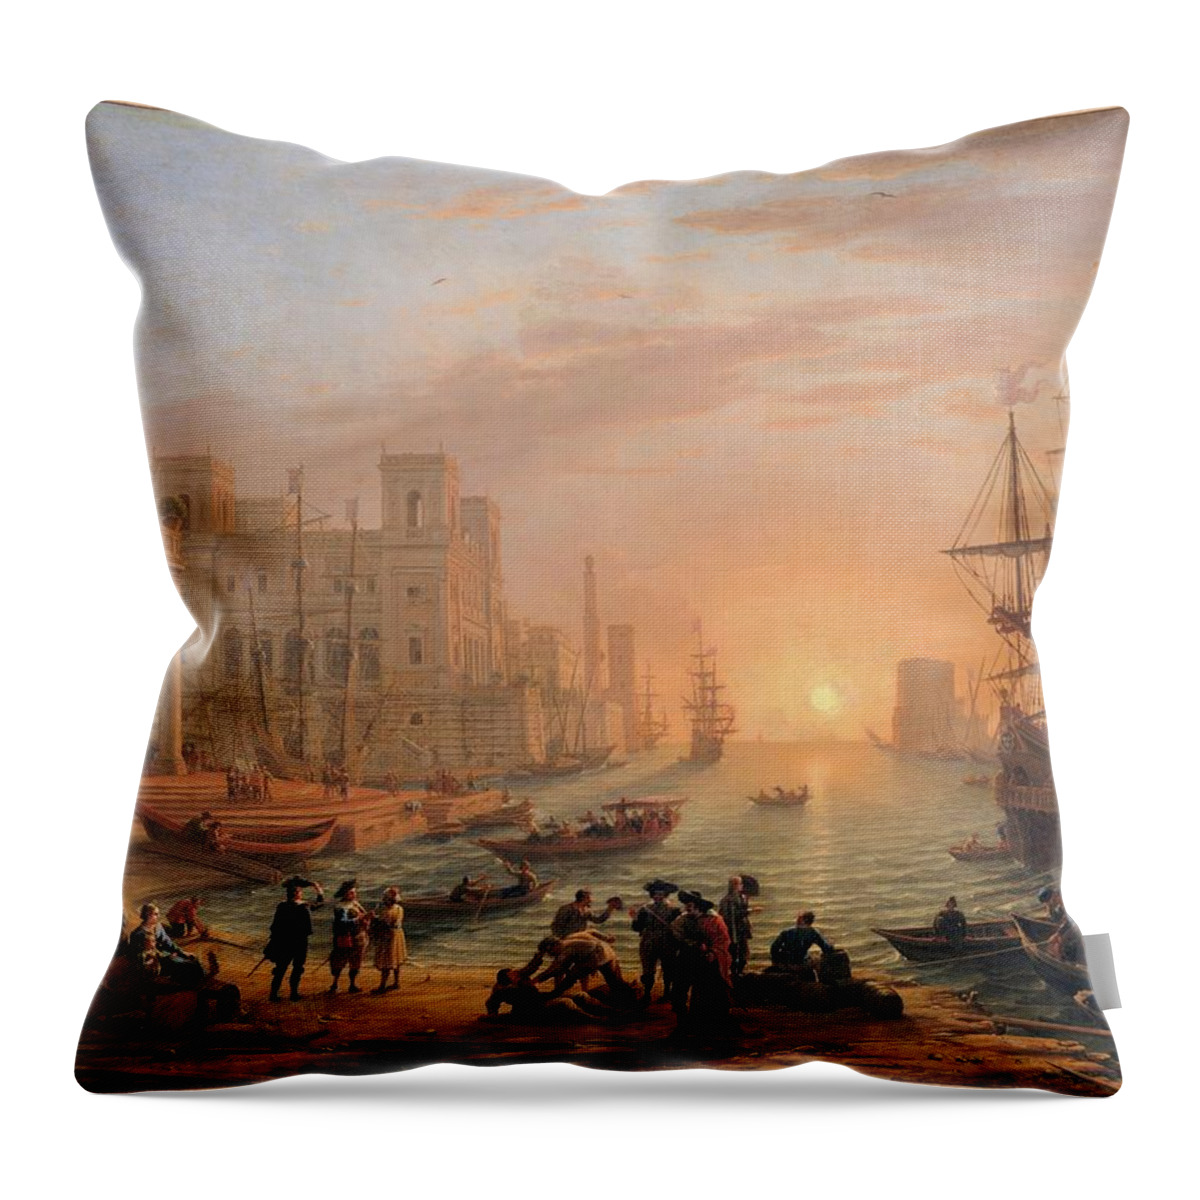 Italy Throw Pillow featuring the painting Harbour Scene at Sunset by MotionAge Designs